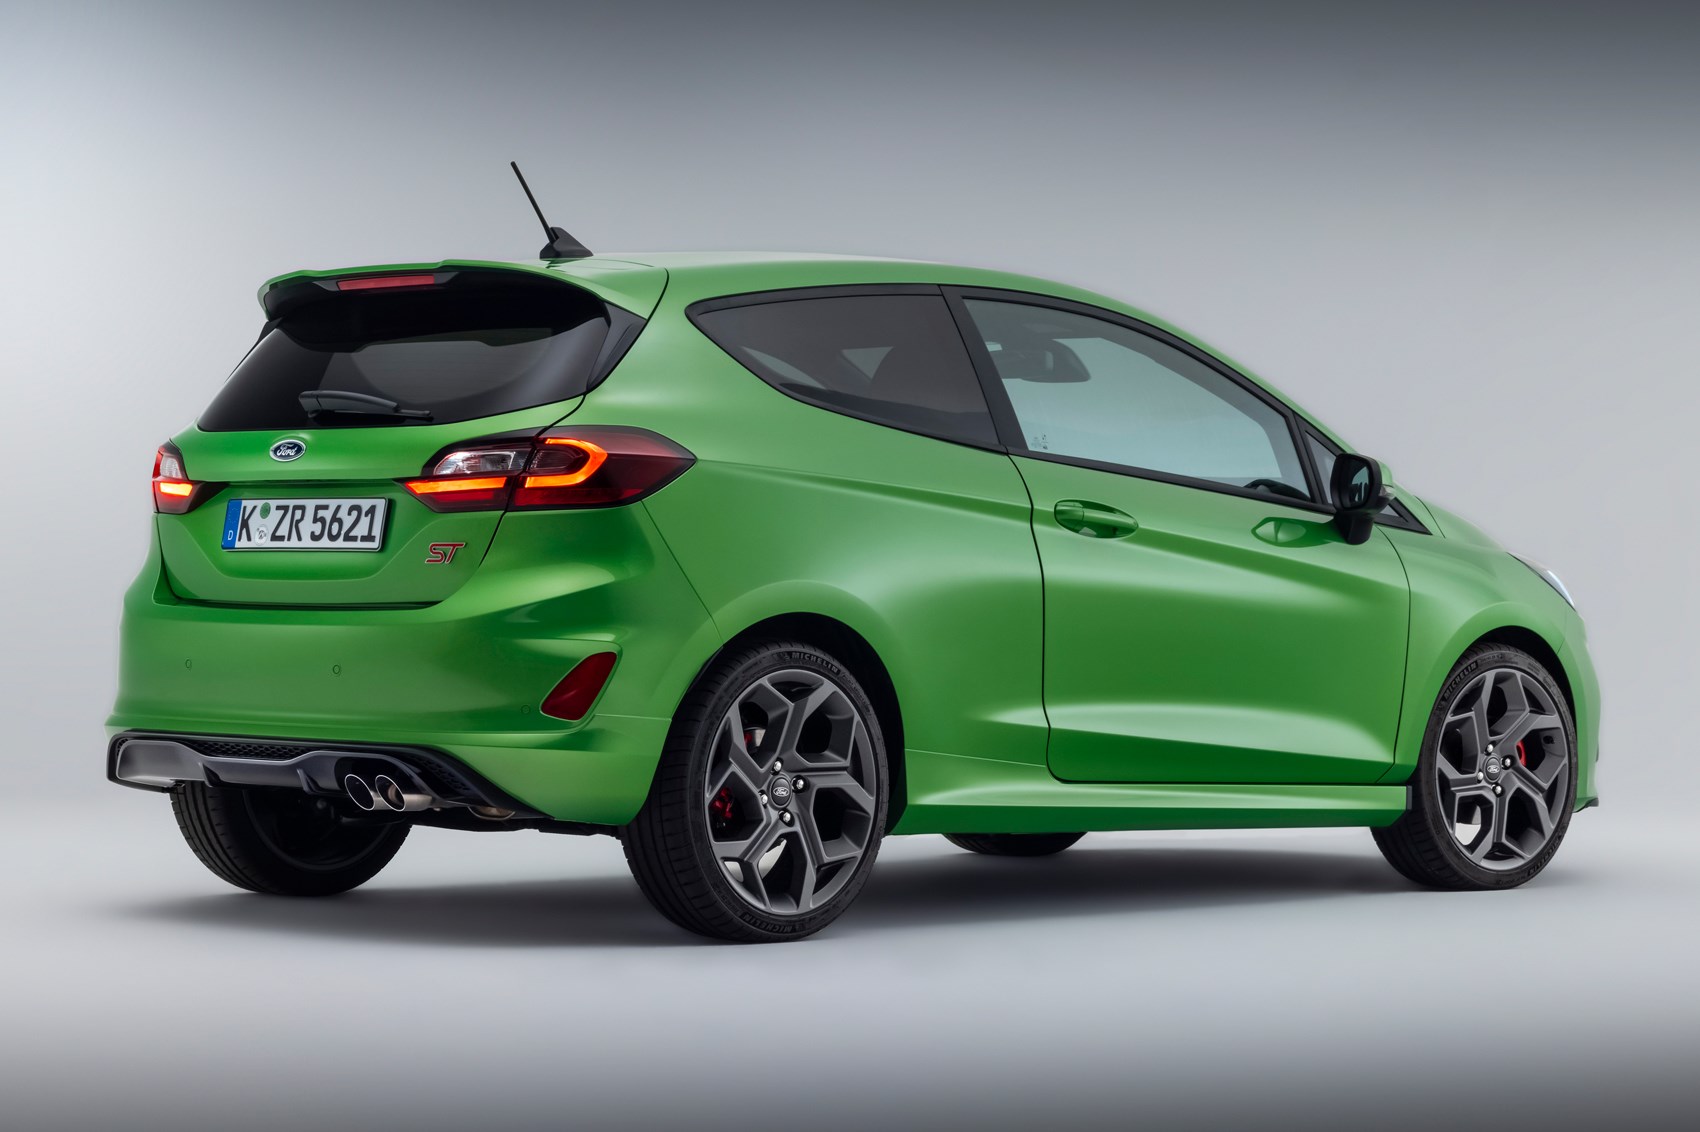 New Ford Fiesta 2021 facelift adds more tech and electrification CAR